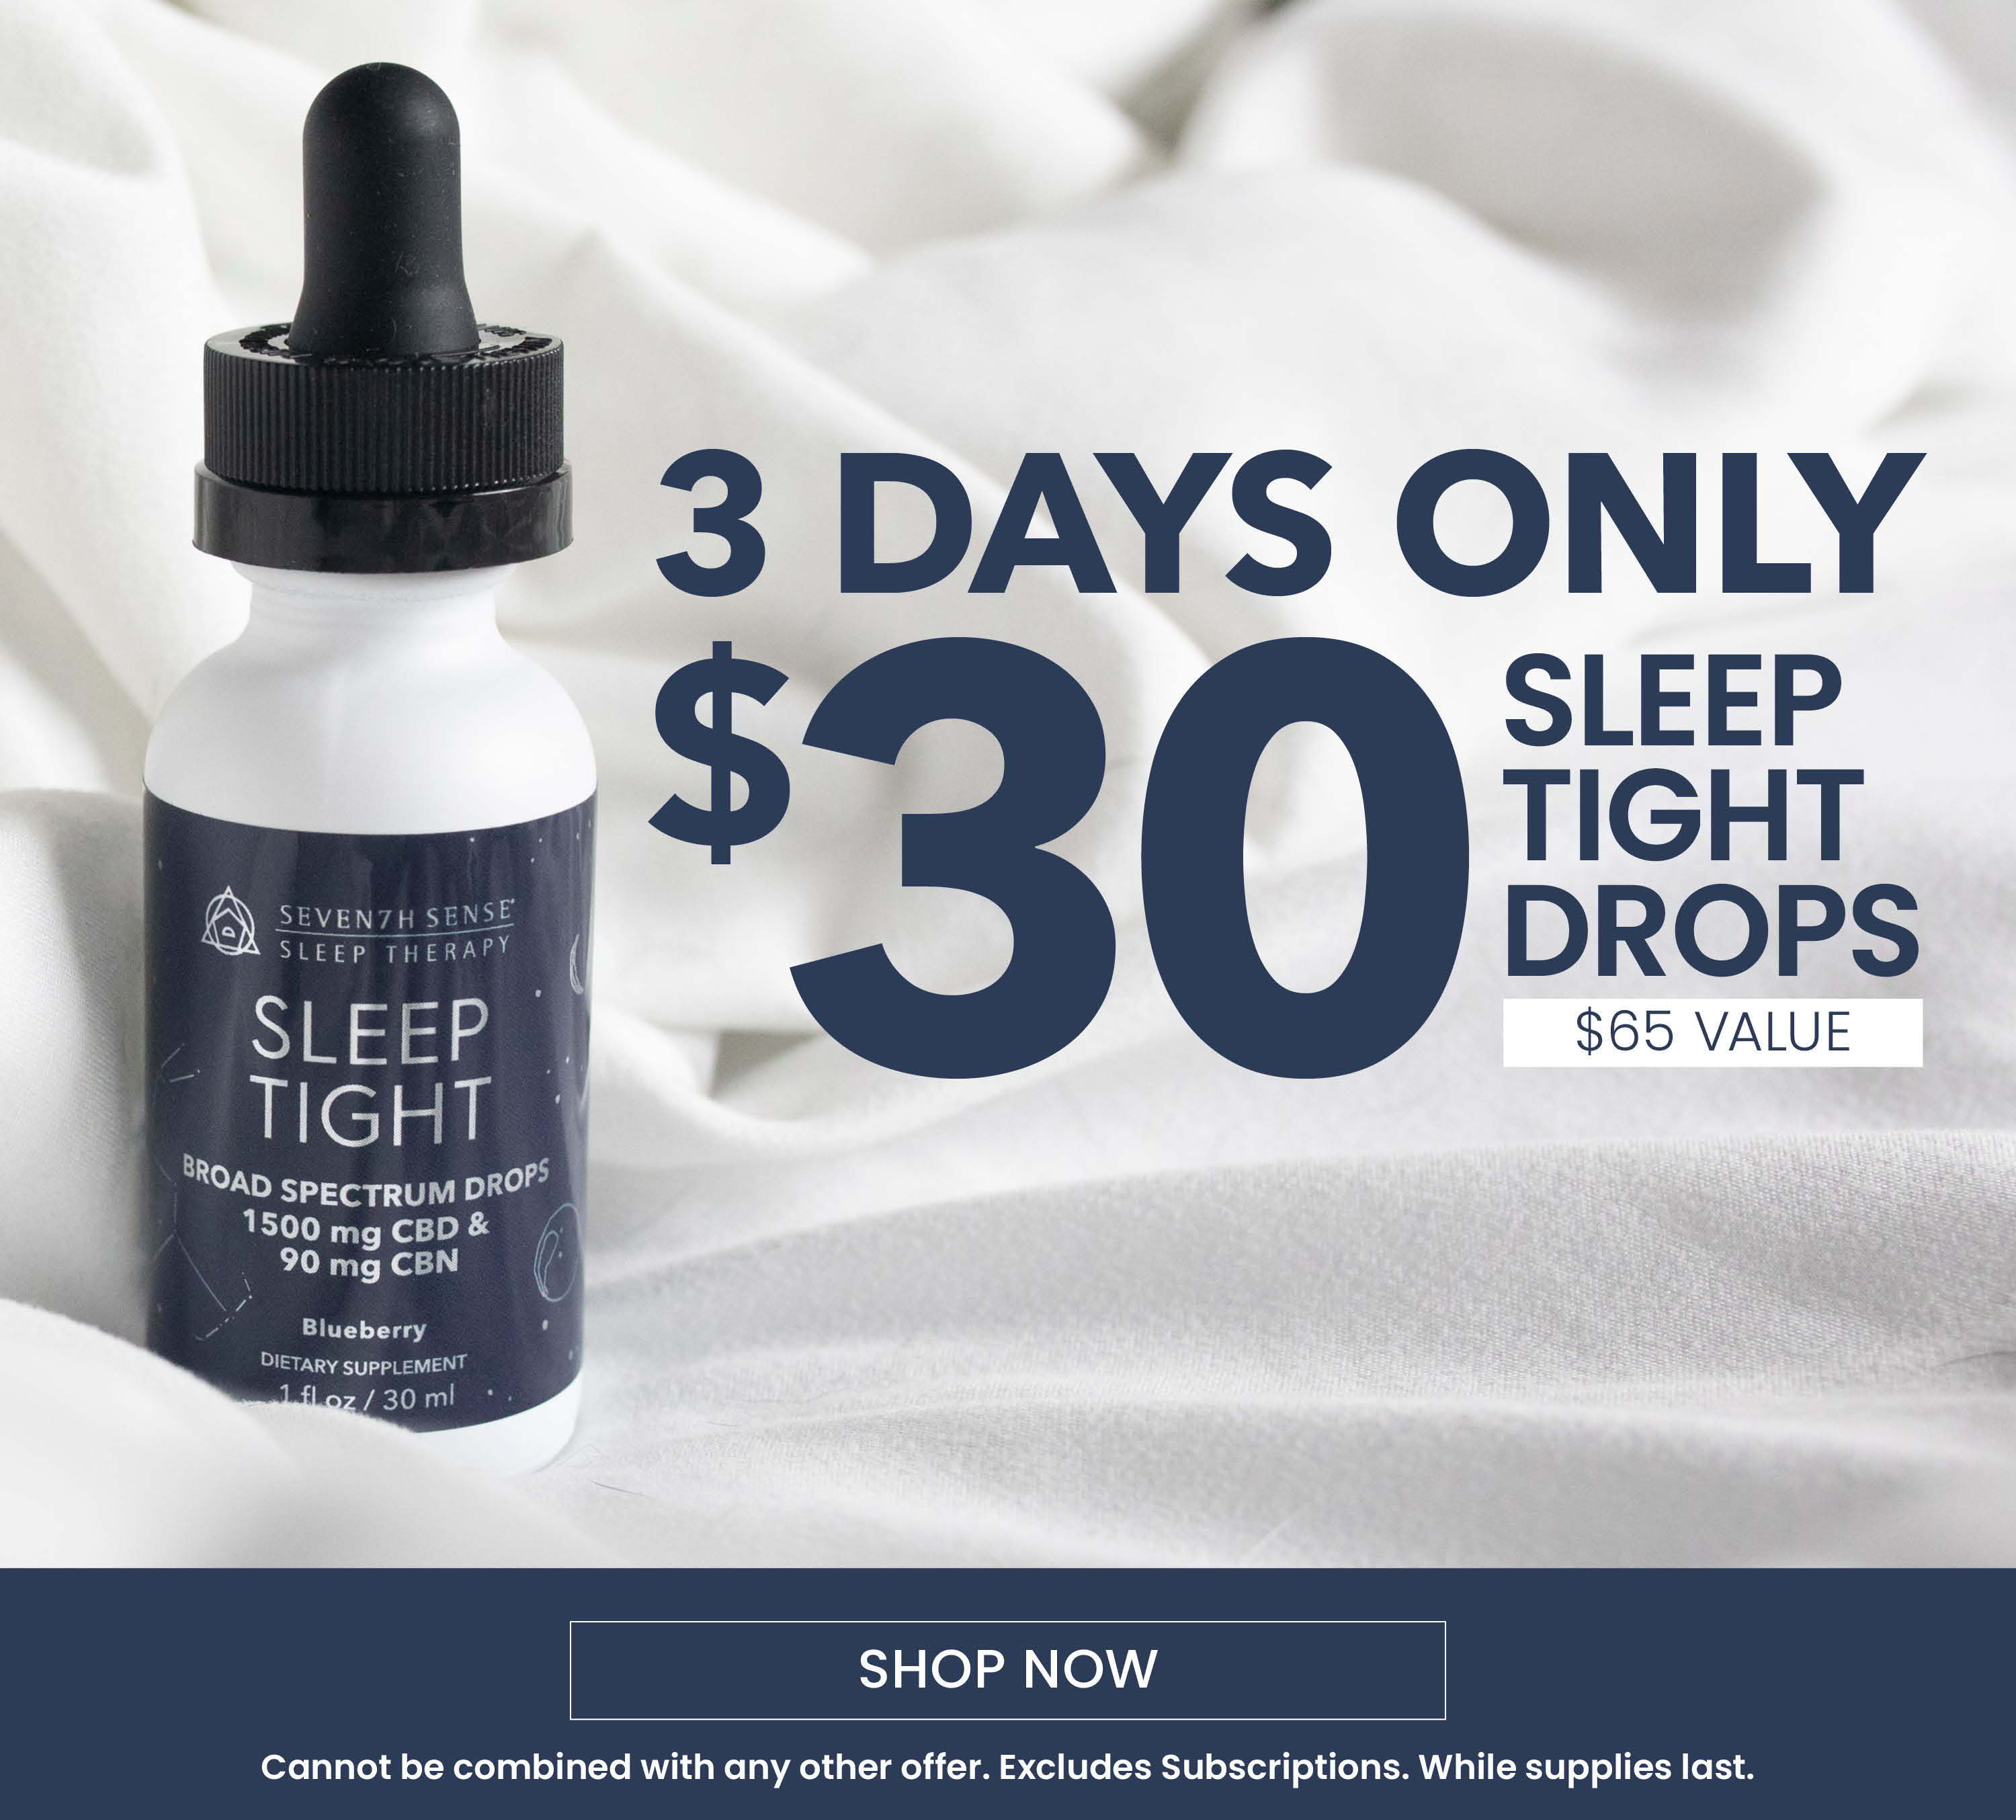 3 Days Only. $30 Sleep Tight Drops. $65 Value.